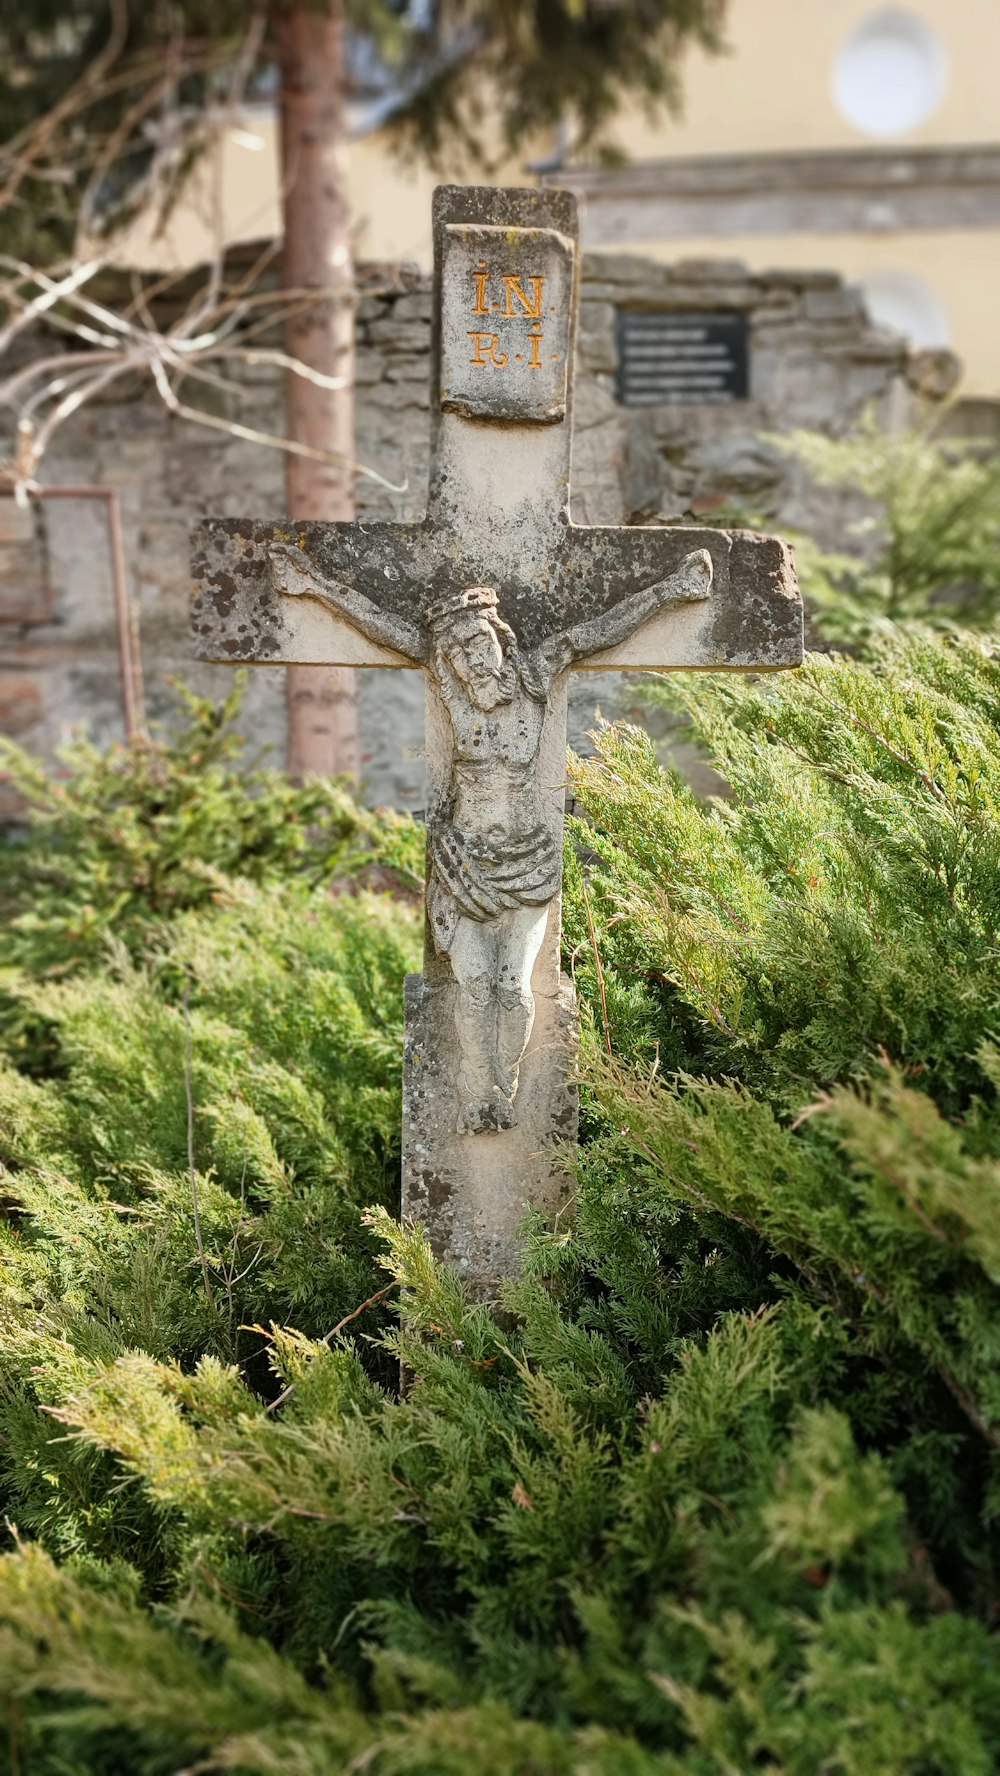 a stone cross in the middle of some bushes